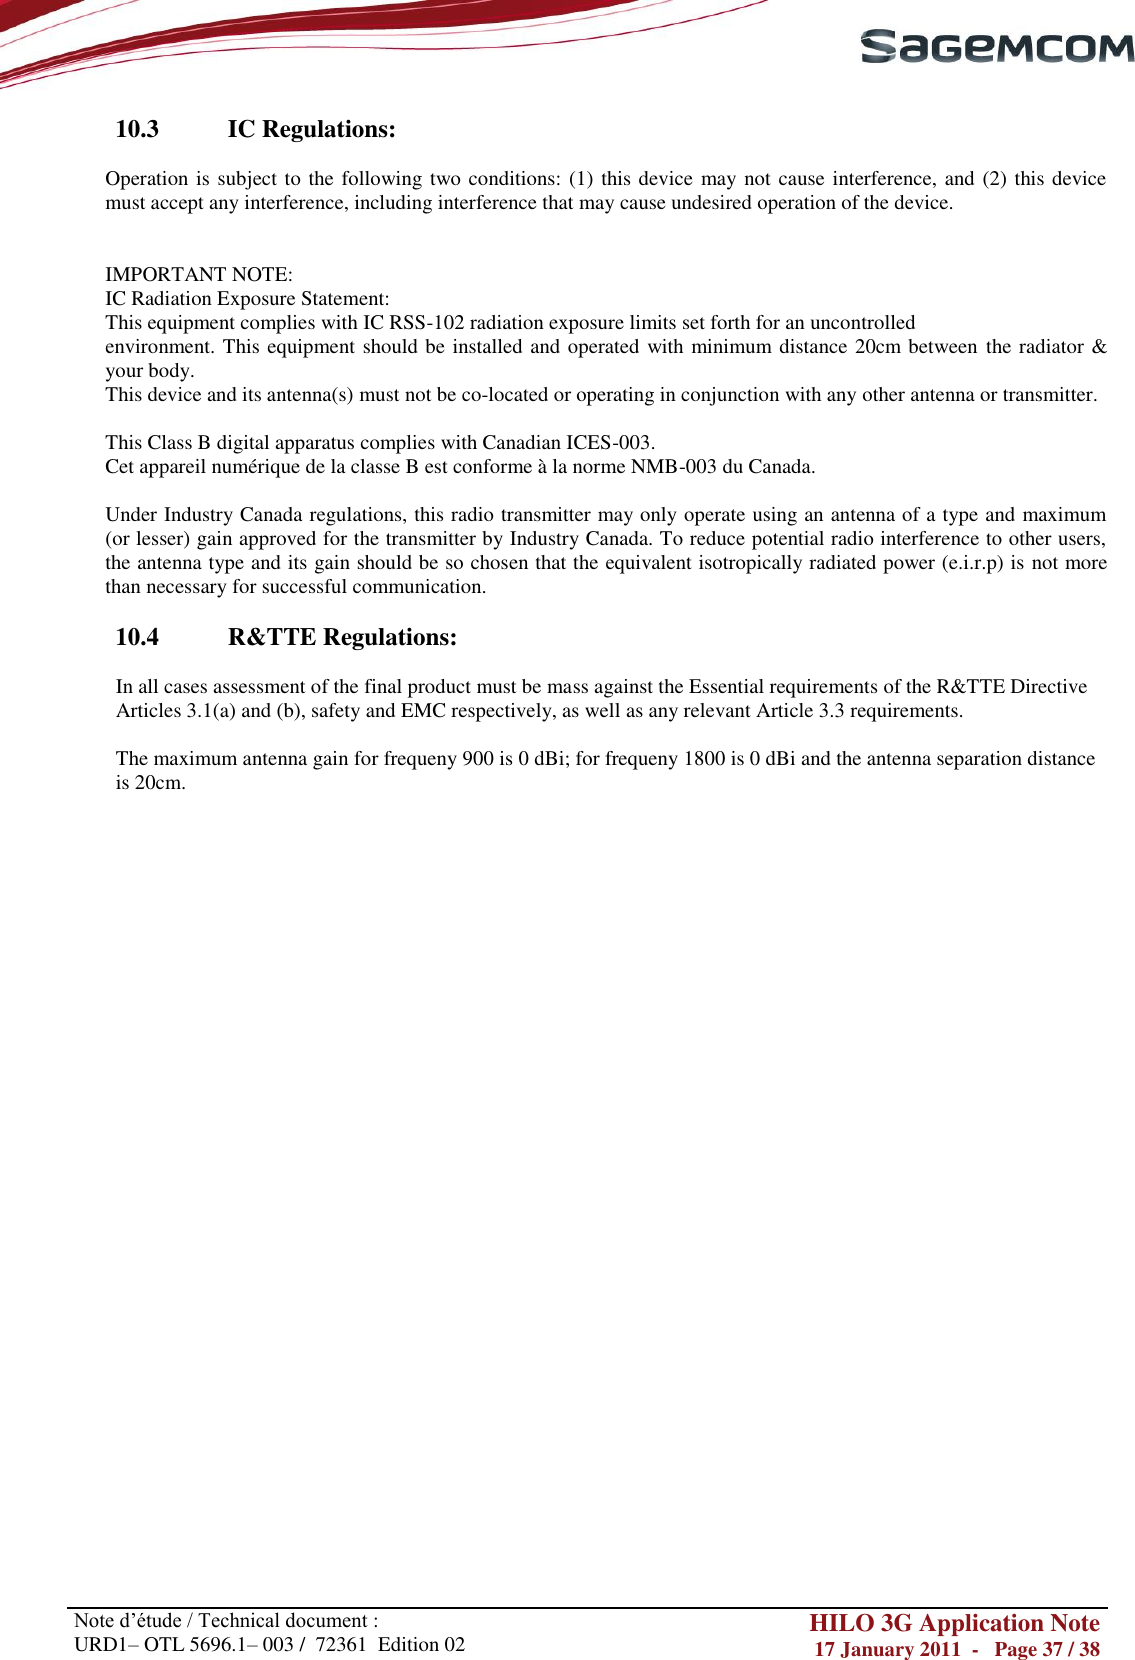       Note d‘étude / Technical document : URD1– OTL 5696.1– 003 /  72361  Edition 02 HILO 3G Application Note 17 January 2011  -   Page 37 / 38    10.3  IC Regulations:  Operation is subject to the following two conditions: (1) this device  may not cause interference, and (2) this device must accept any interference, including interference that may cause undesired operation of the device.   IMPORTANT NOTE: IC Radiation Exposure Statement: This equipment complies with IC RSS-102 radiation exposure limits set forth for an uncontrolled environment. This equipment should be installed and operated with minimum distance 20cm between the radiator &amp; your body. This device and its antenna(s) must not be co-located or operating in conjunction with any other antenna or transmitter.  This Class B digital apparatus complies with Canadian ICES-003. Cet appareil numérique de la classe B est conforme à la norme NMB-003 du Canada.  Under Industry Canada regulations, this radio transmitter may only operate using an antenna of a type and maximum (or lesser) gain approved for the transmitter by Industry Canada. To reduce potential radio interference to other users, the antenna type and its gain should be so chosen that the equivalent isotropically radiated power (e.i.r.p) is not more than necessary for successful communication.  10.4  R&amp;TTE Regulations:  In all cases assessment of the final product must be mass against the Essential requirements of the R&amp;TTE Directive Articles 3.1(a) and (b), safety and EMC respectively, as well as any relevant Article 3.3 requirements.  The maximum antenna gain for frequeny 900 is 0 dBi; for frequeny 1800 is 0 dBi and the antenna separation distance is 20cm. 